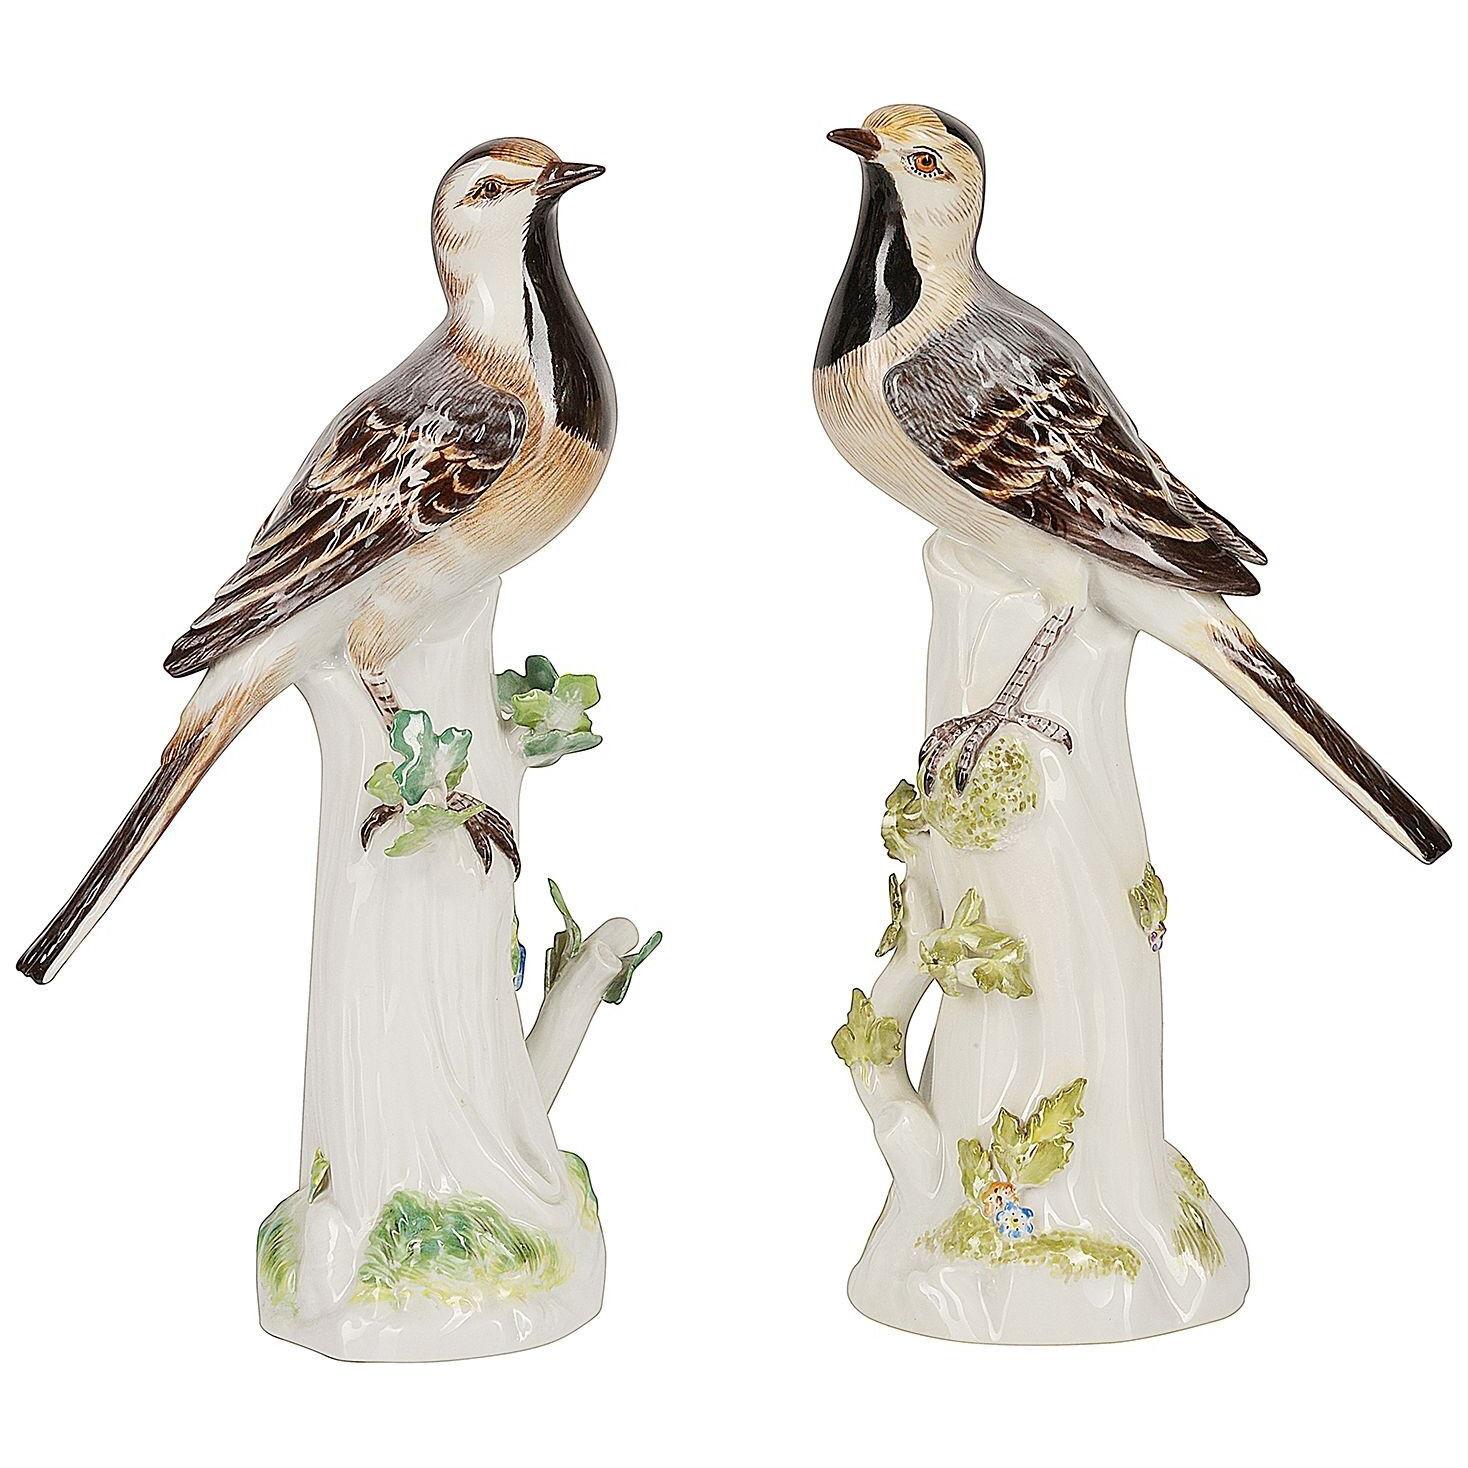 Pair Meissen porcelain Wag tails, perched on a tree stump, circa 1900